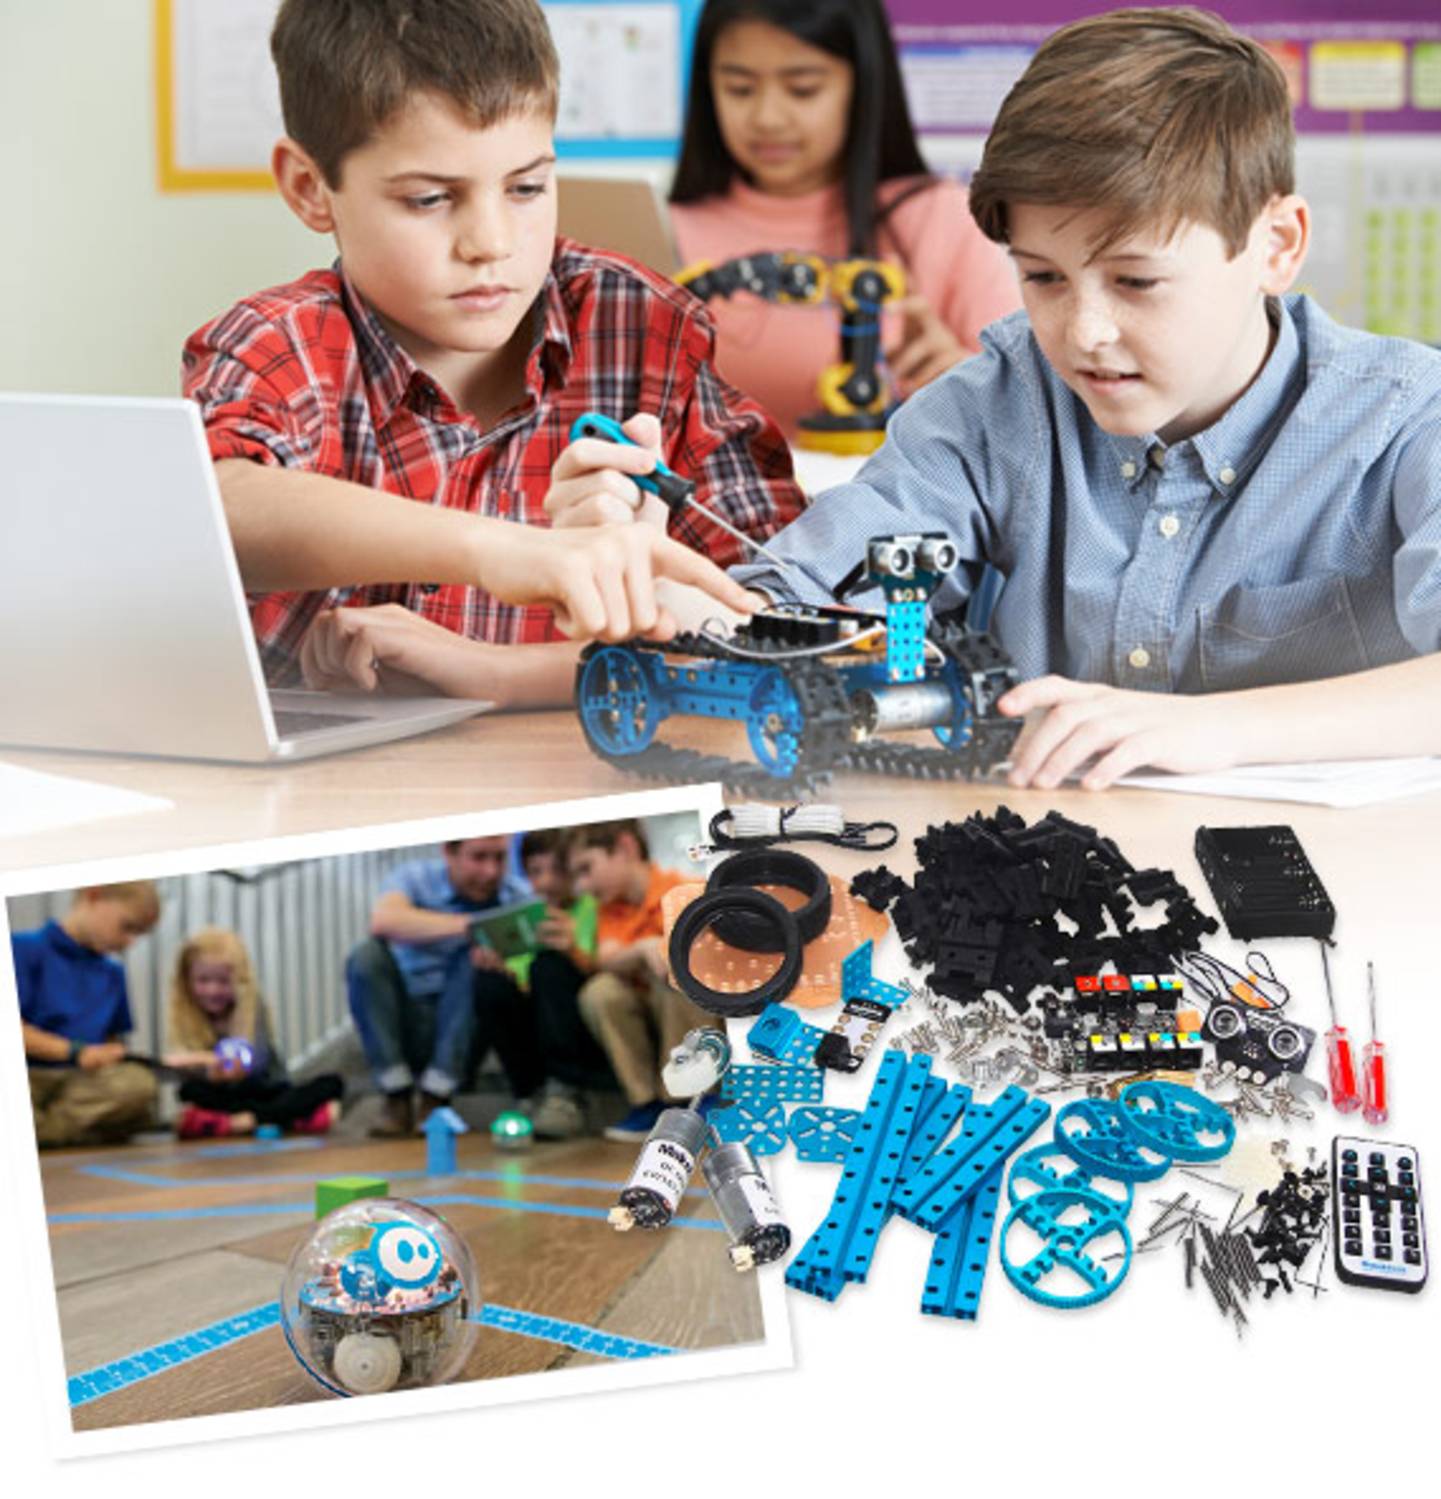 Robots in the classroom